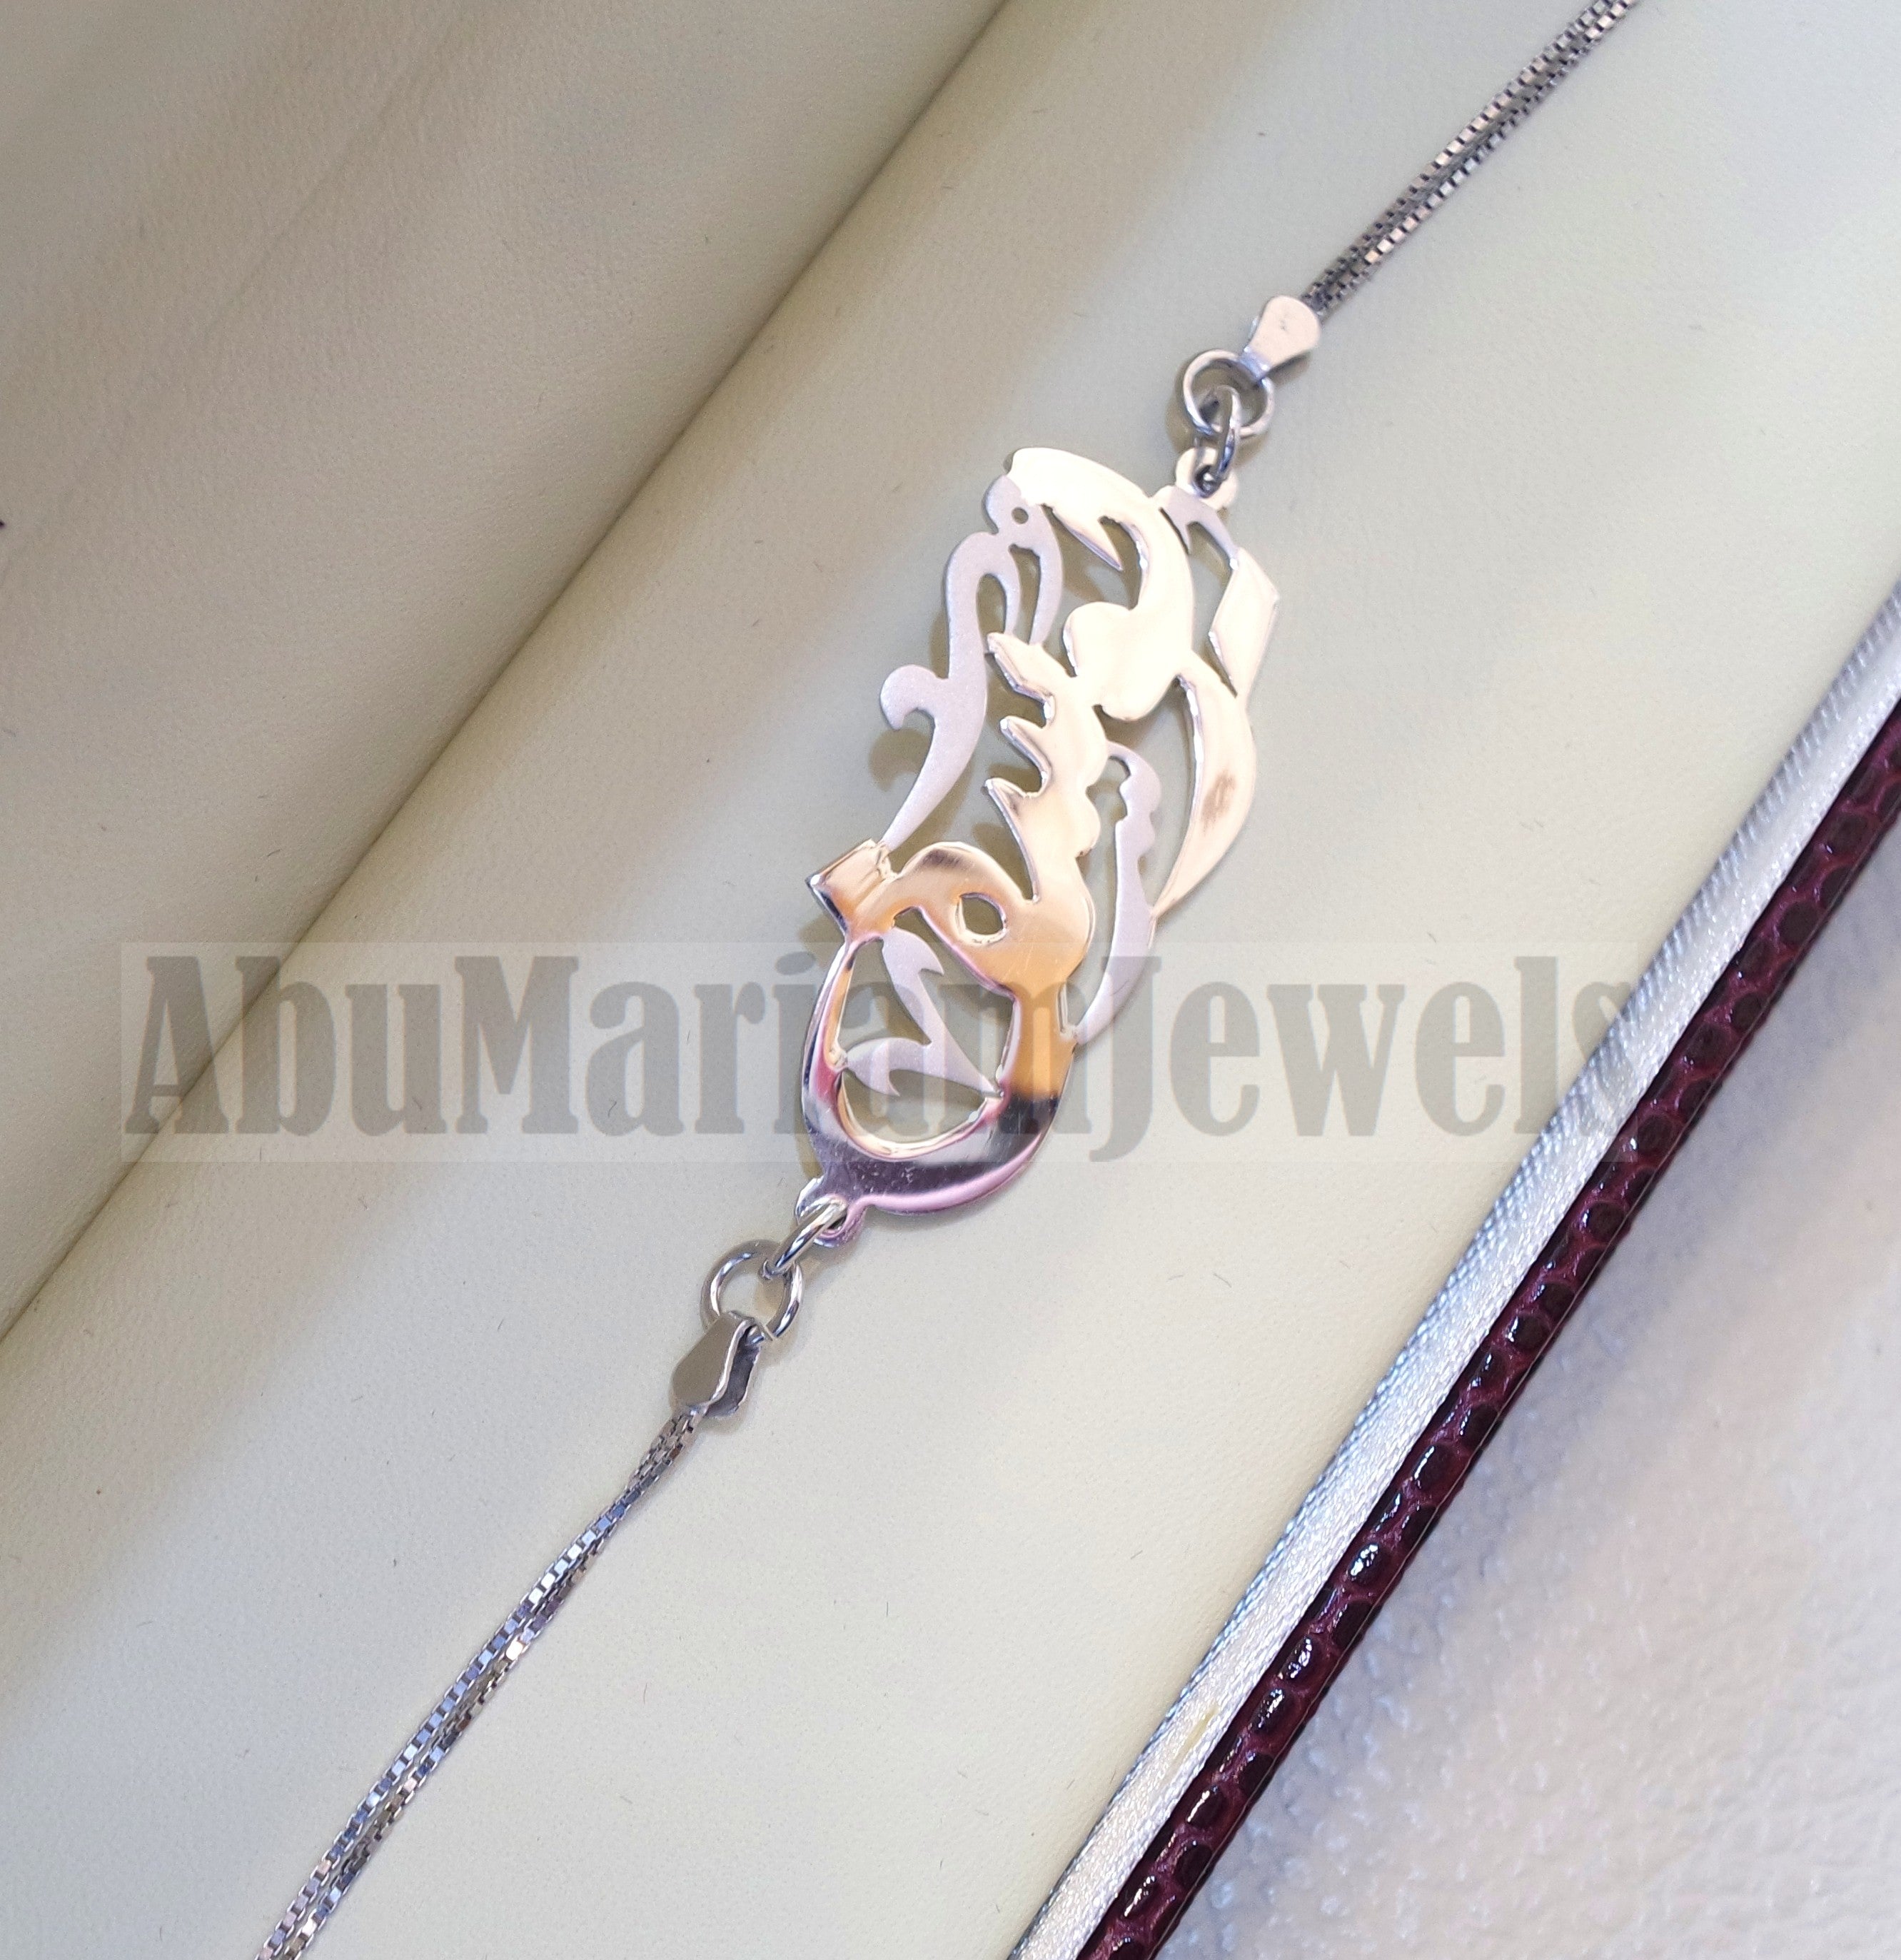 arabic calligraphy customized name sterling silver 925 high quality bracelet , fit all sizes any one name BR002 اسوارة اسماء عربي